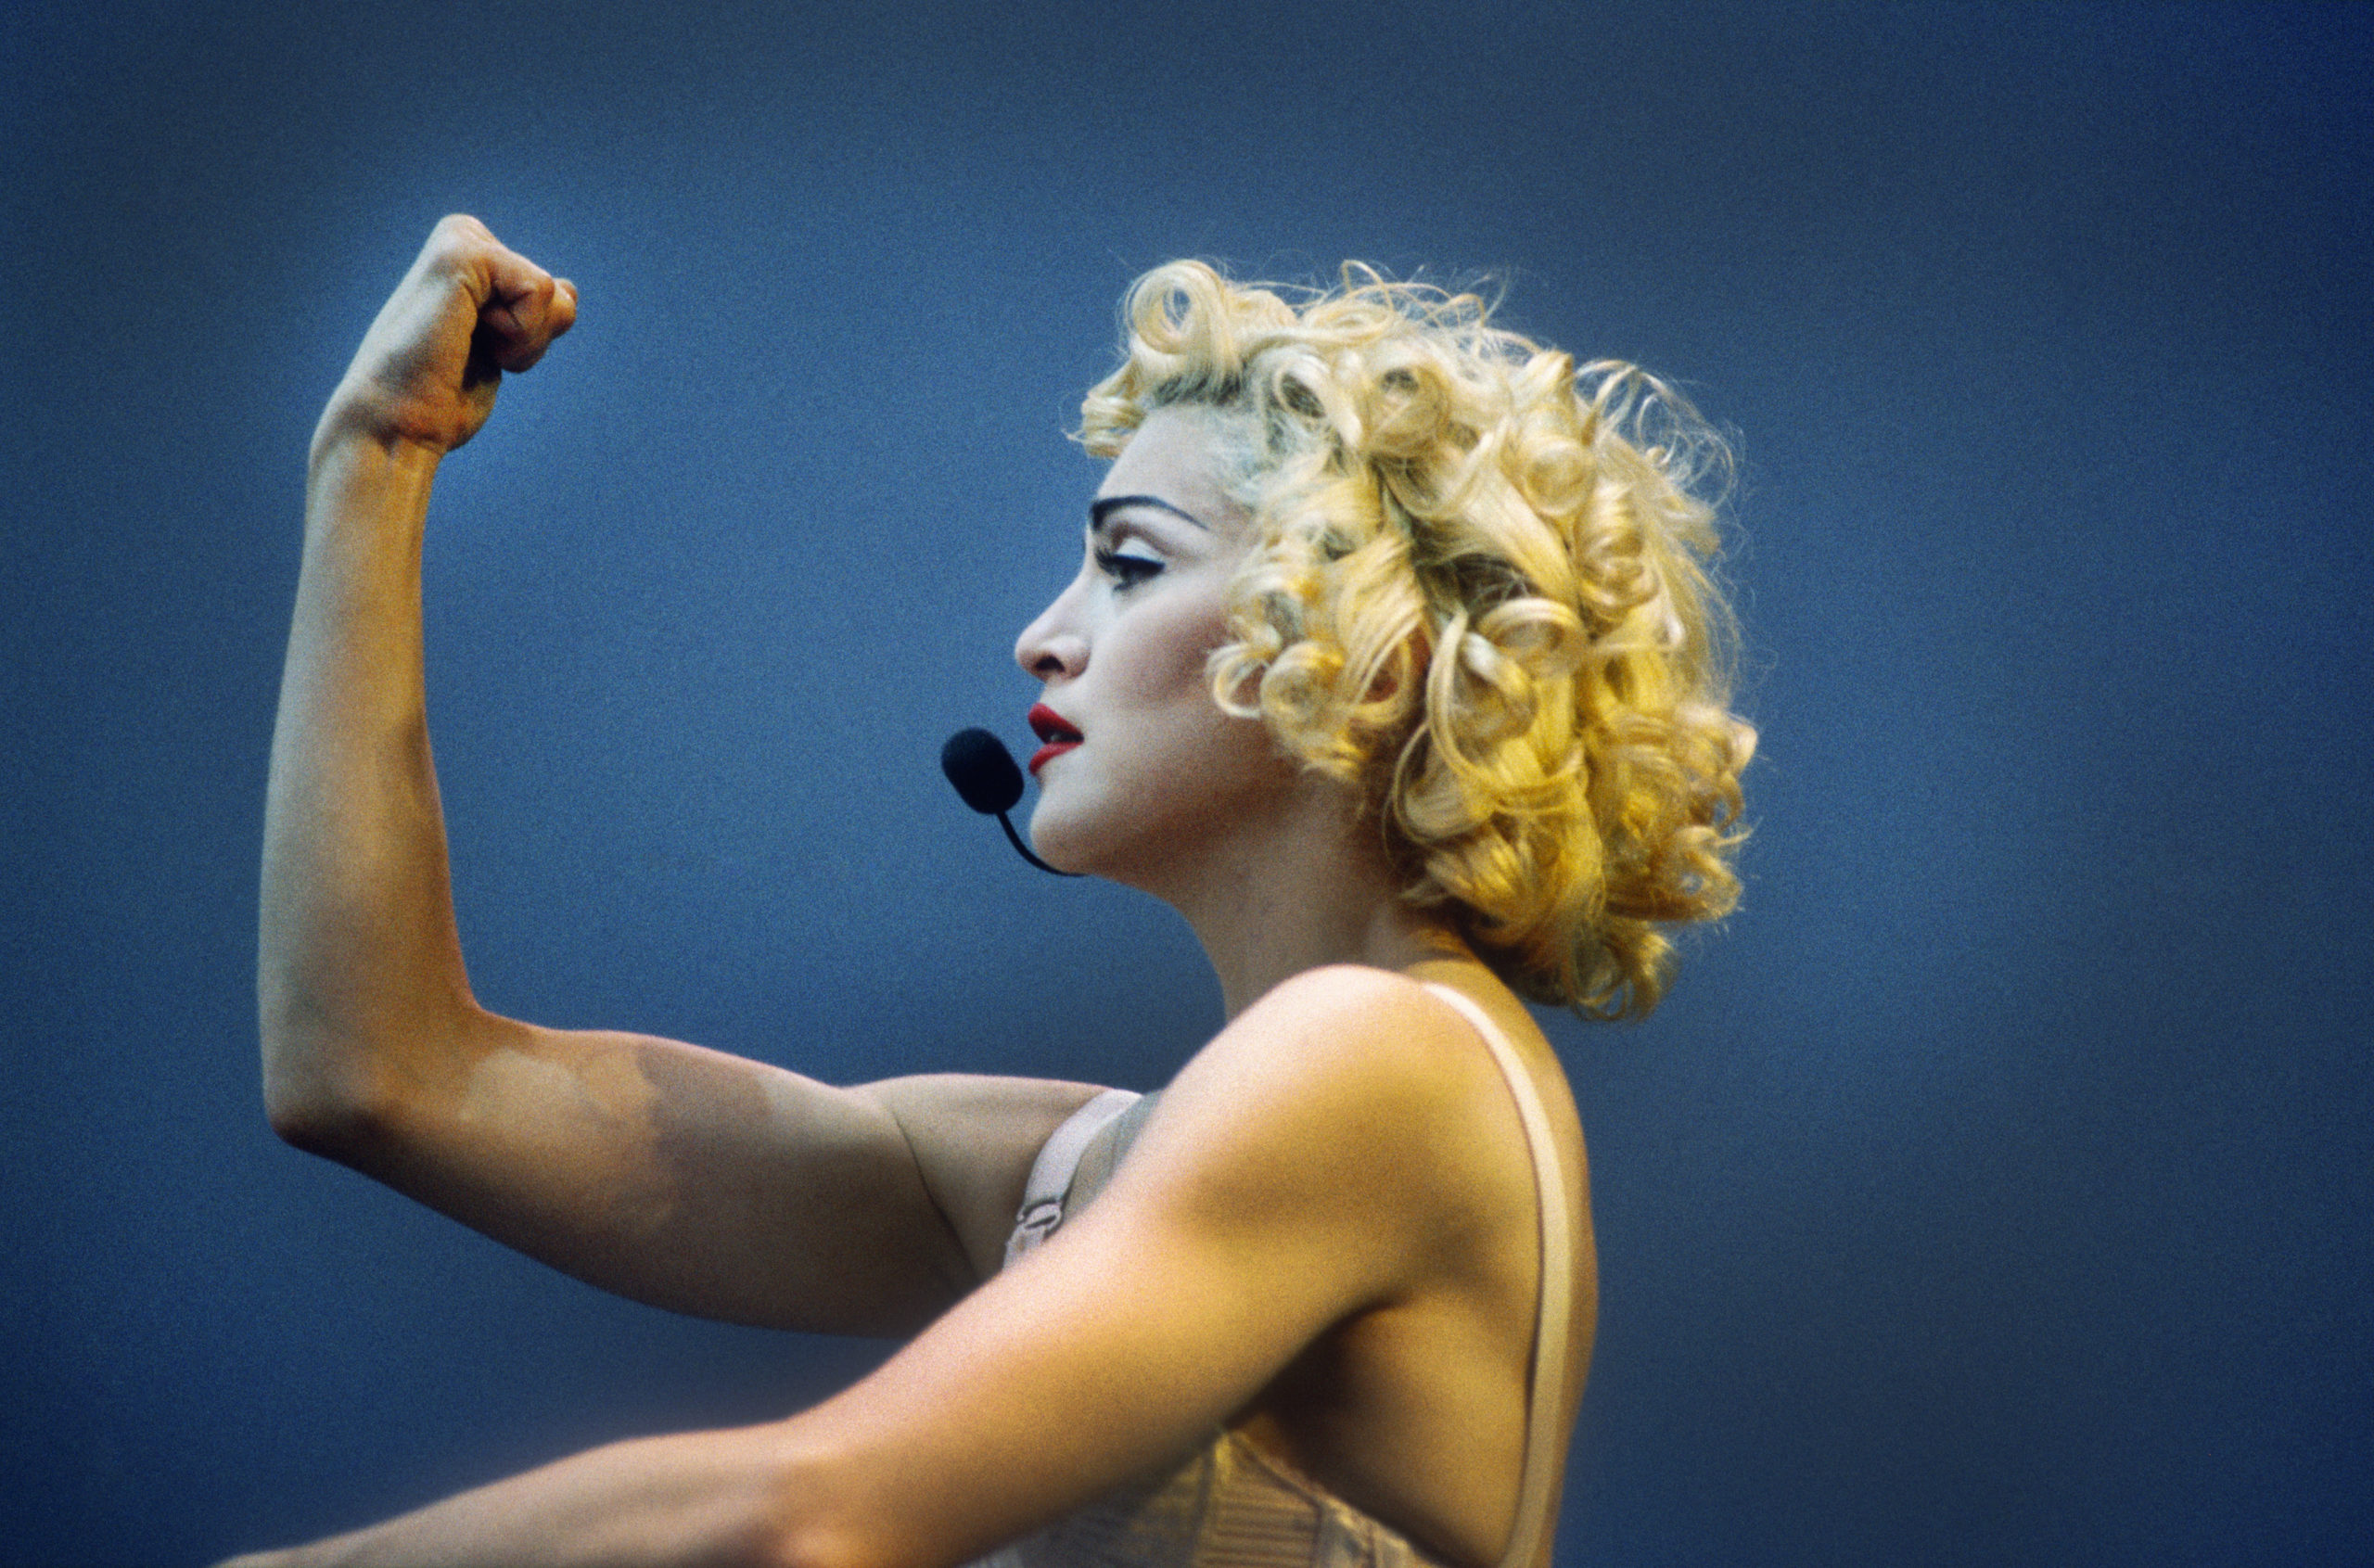 Madonna's Blonde Bob from the Blond Ambition Tour - wide 4